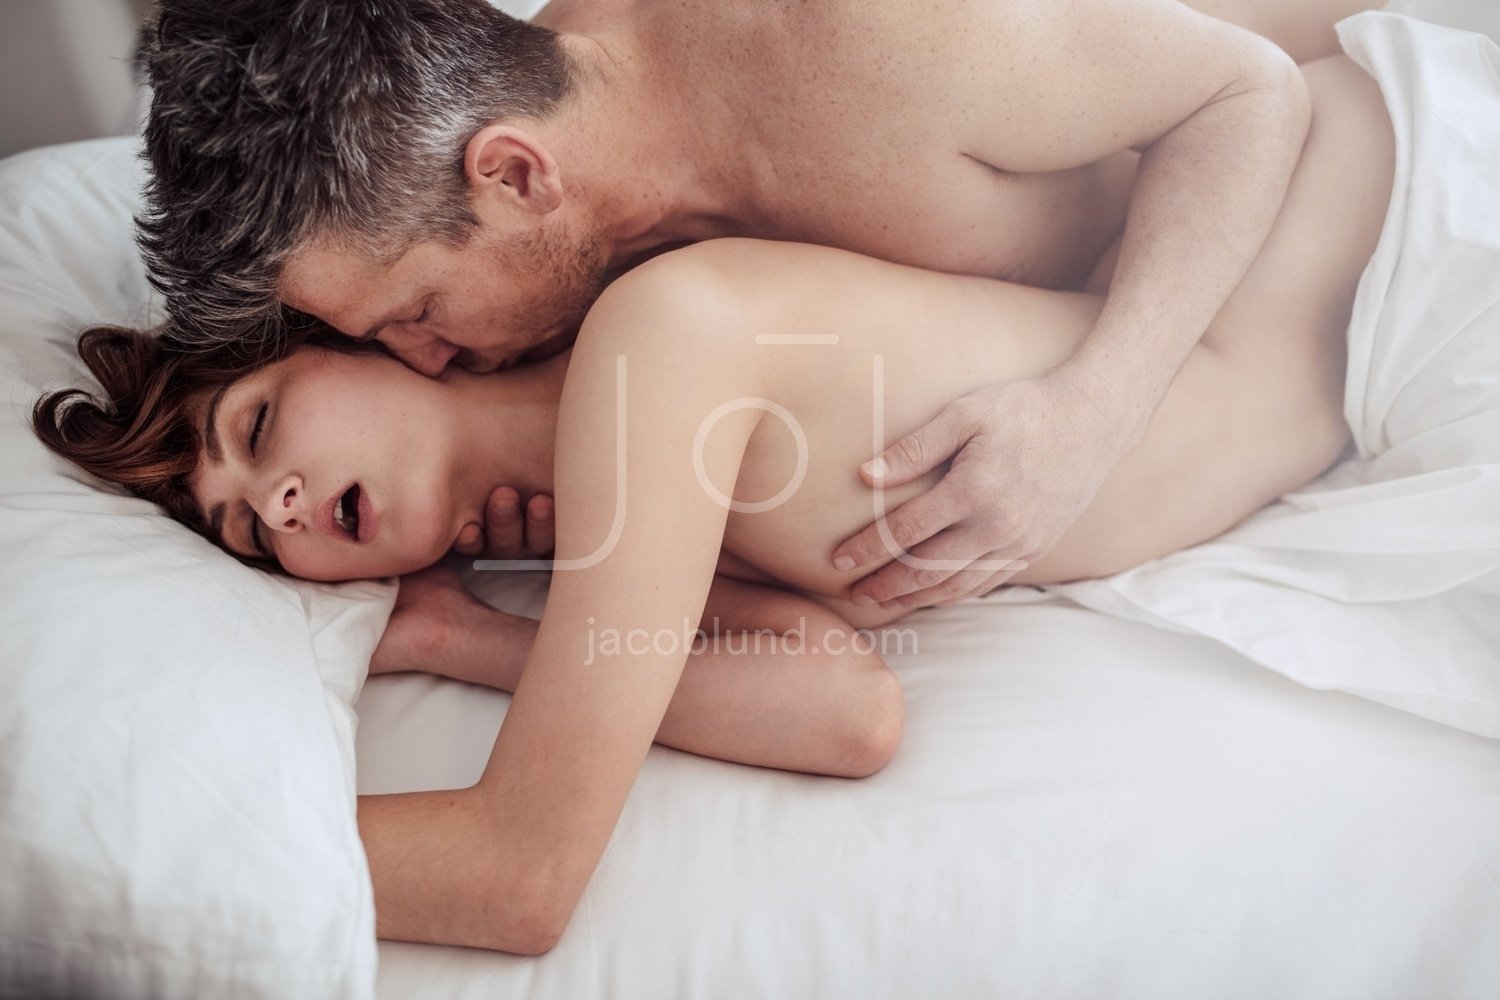 Man and woman in bed having intimate pic